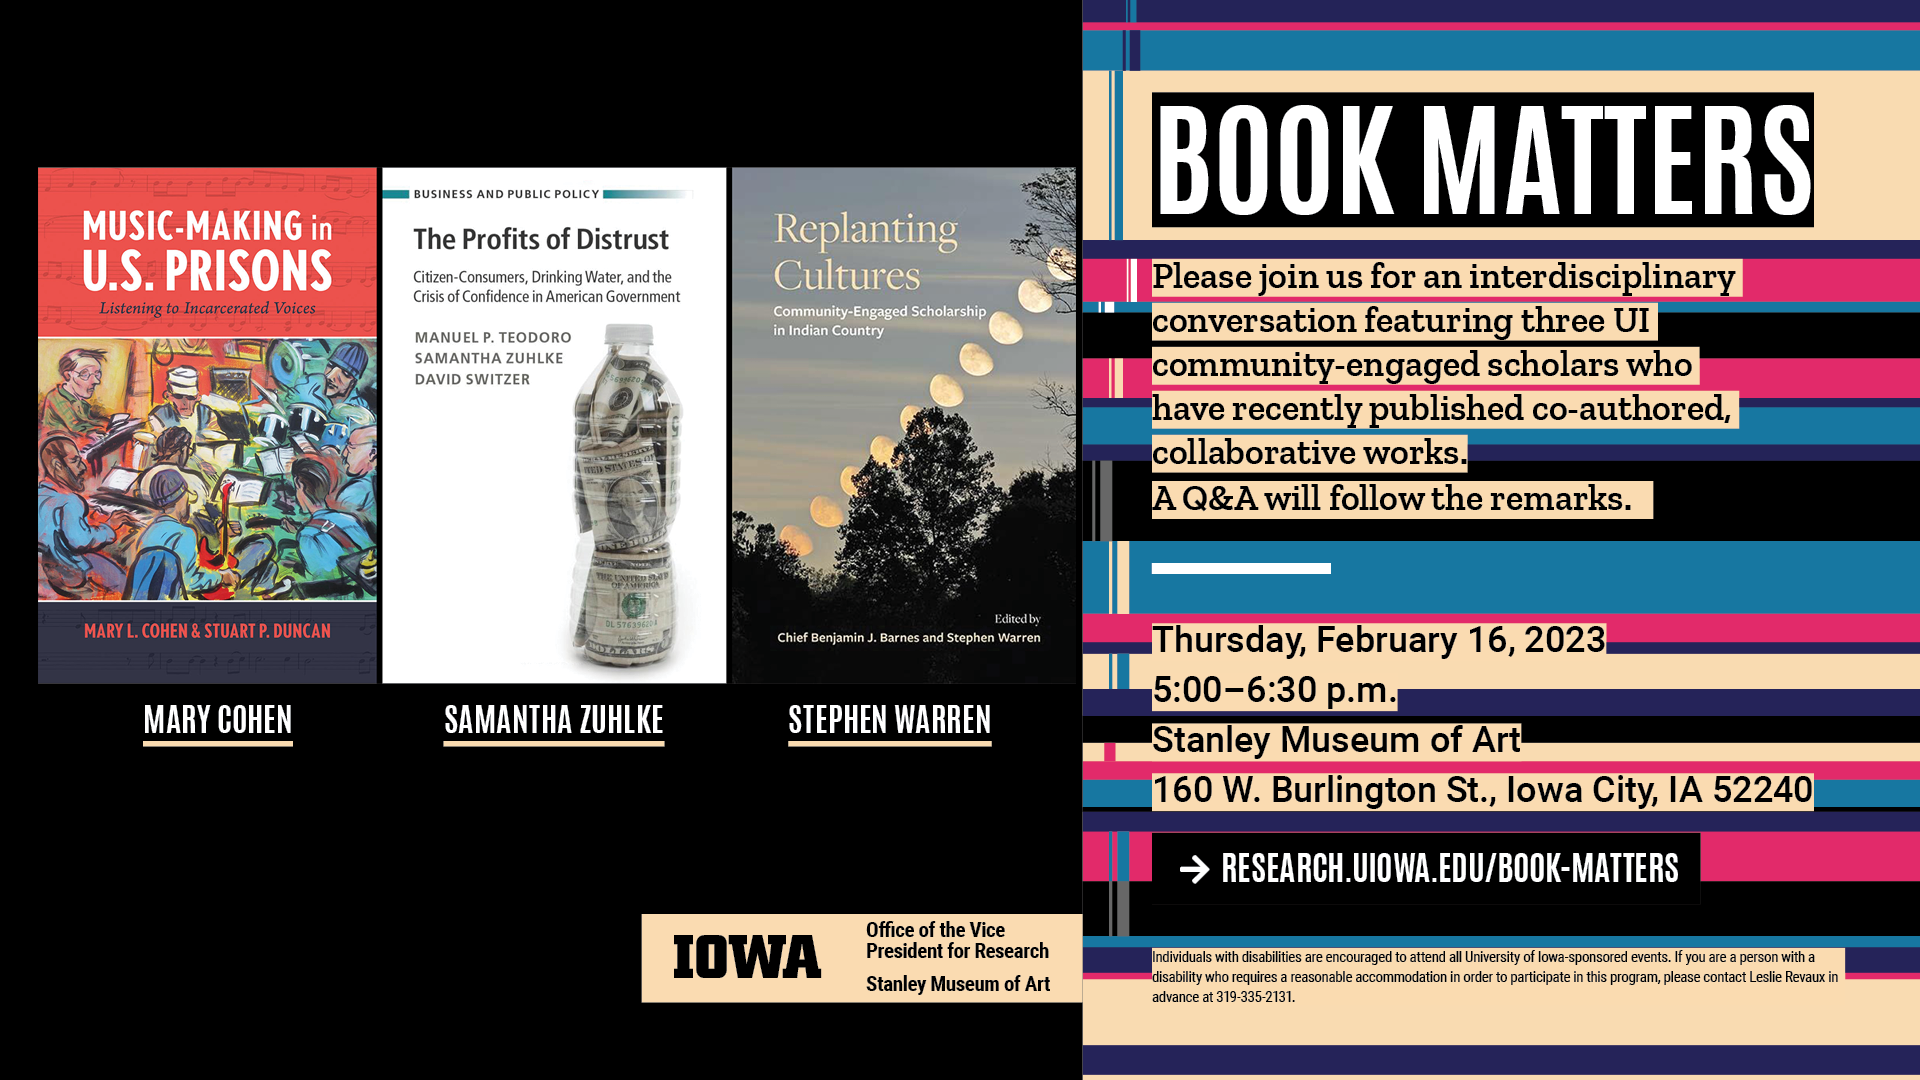 Book Maters Event February 16, 2023 5:00-6:30 Stanley Museum of Art